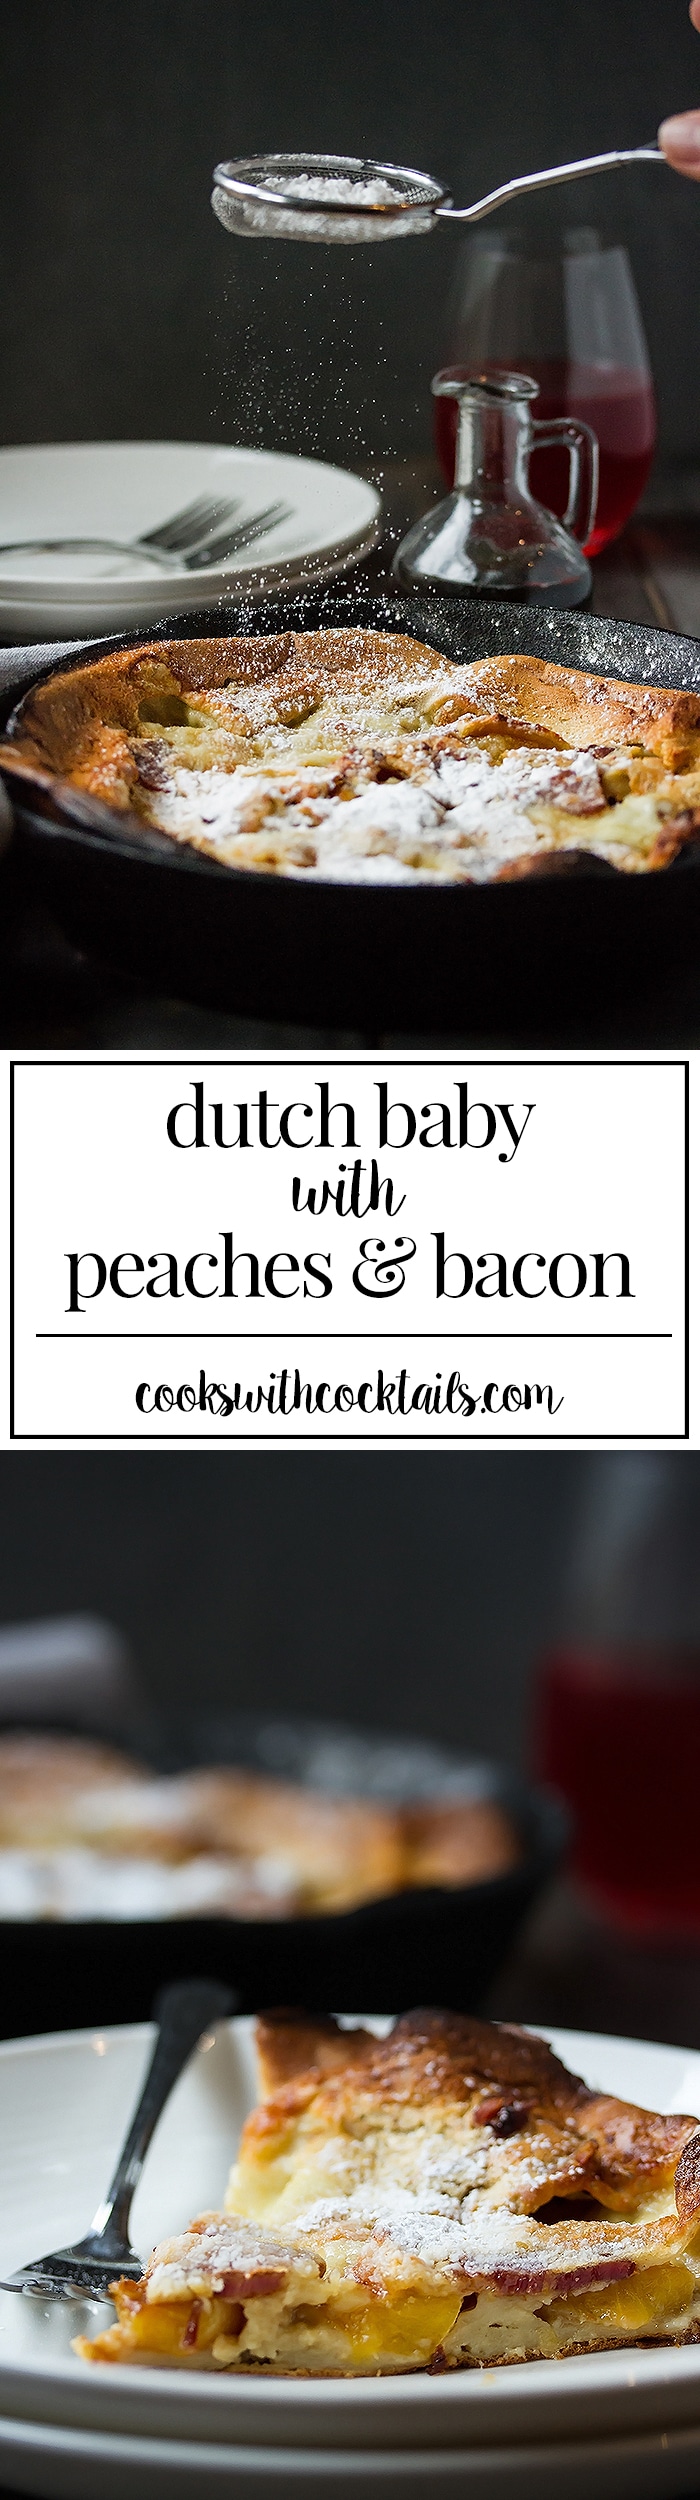 Fluffy Bacon & Peach Dutch Baby Recipe - the Ultimate Brunch Pancakes (2)